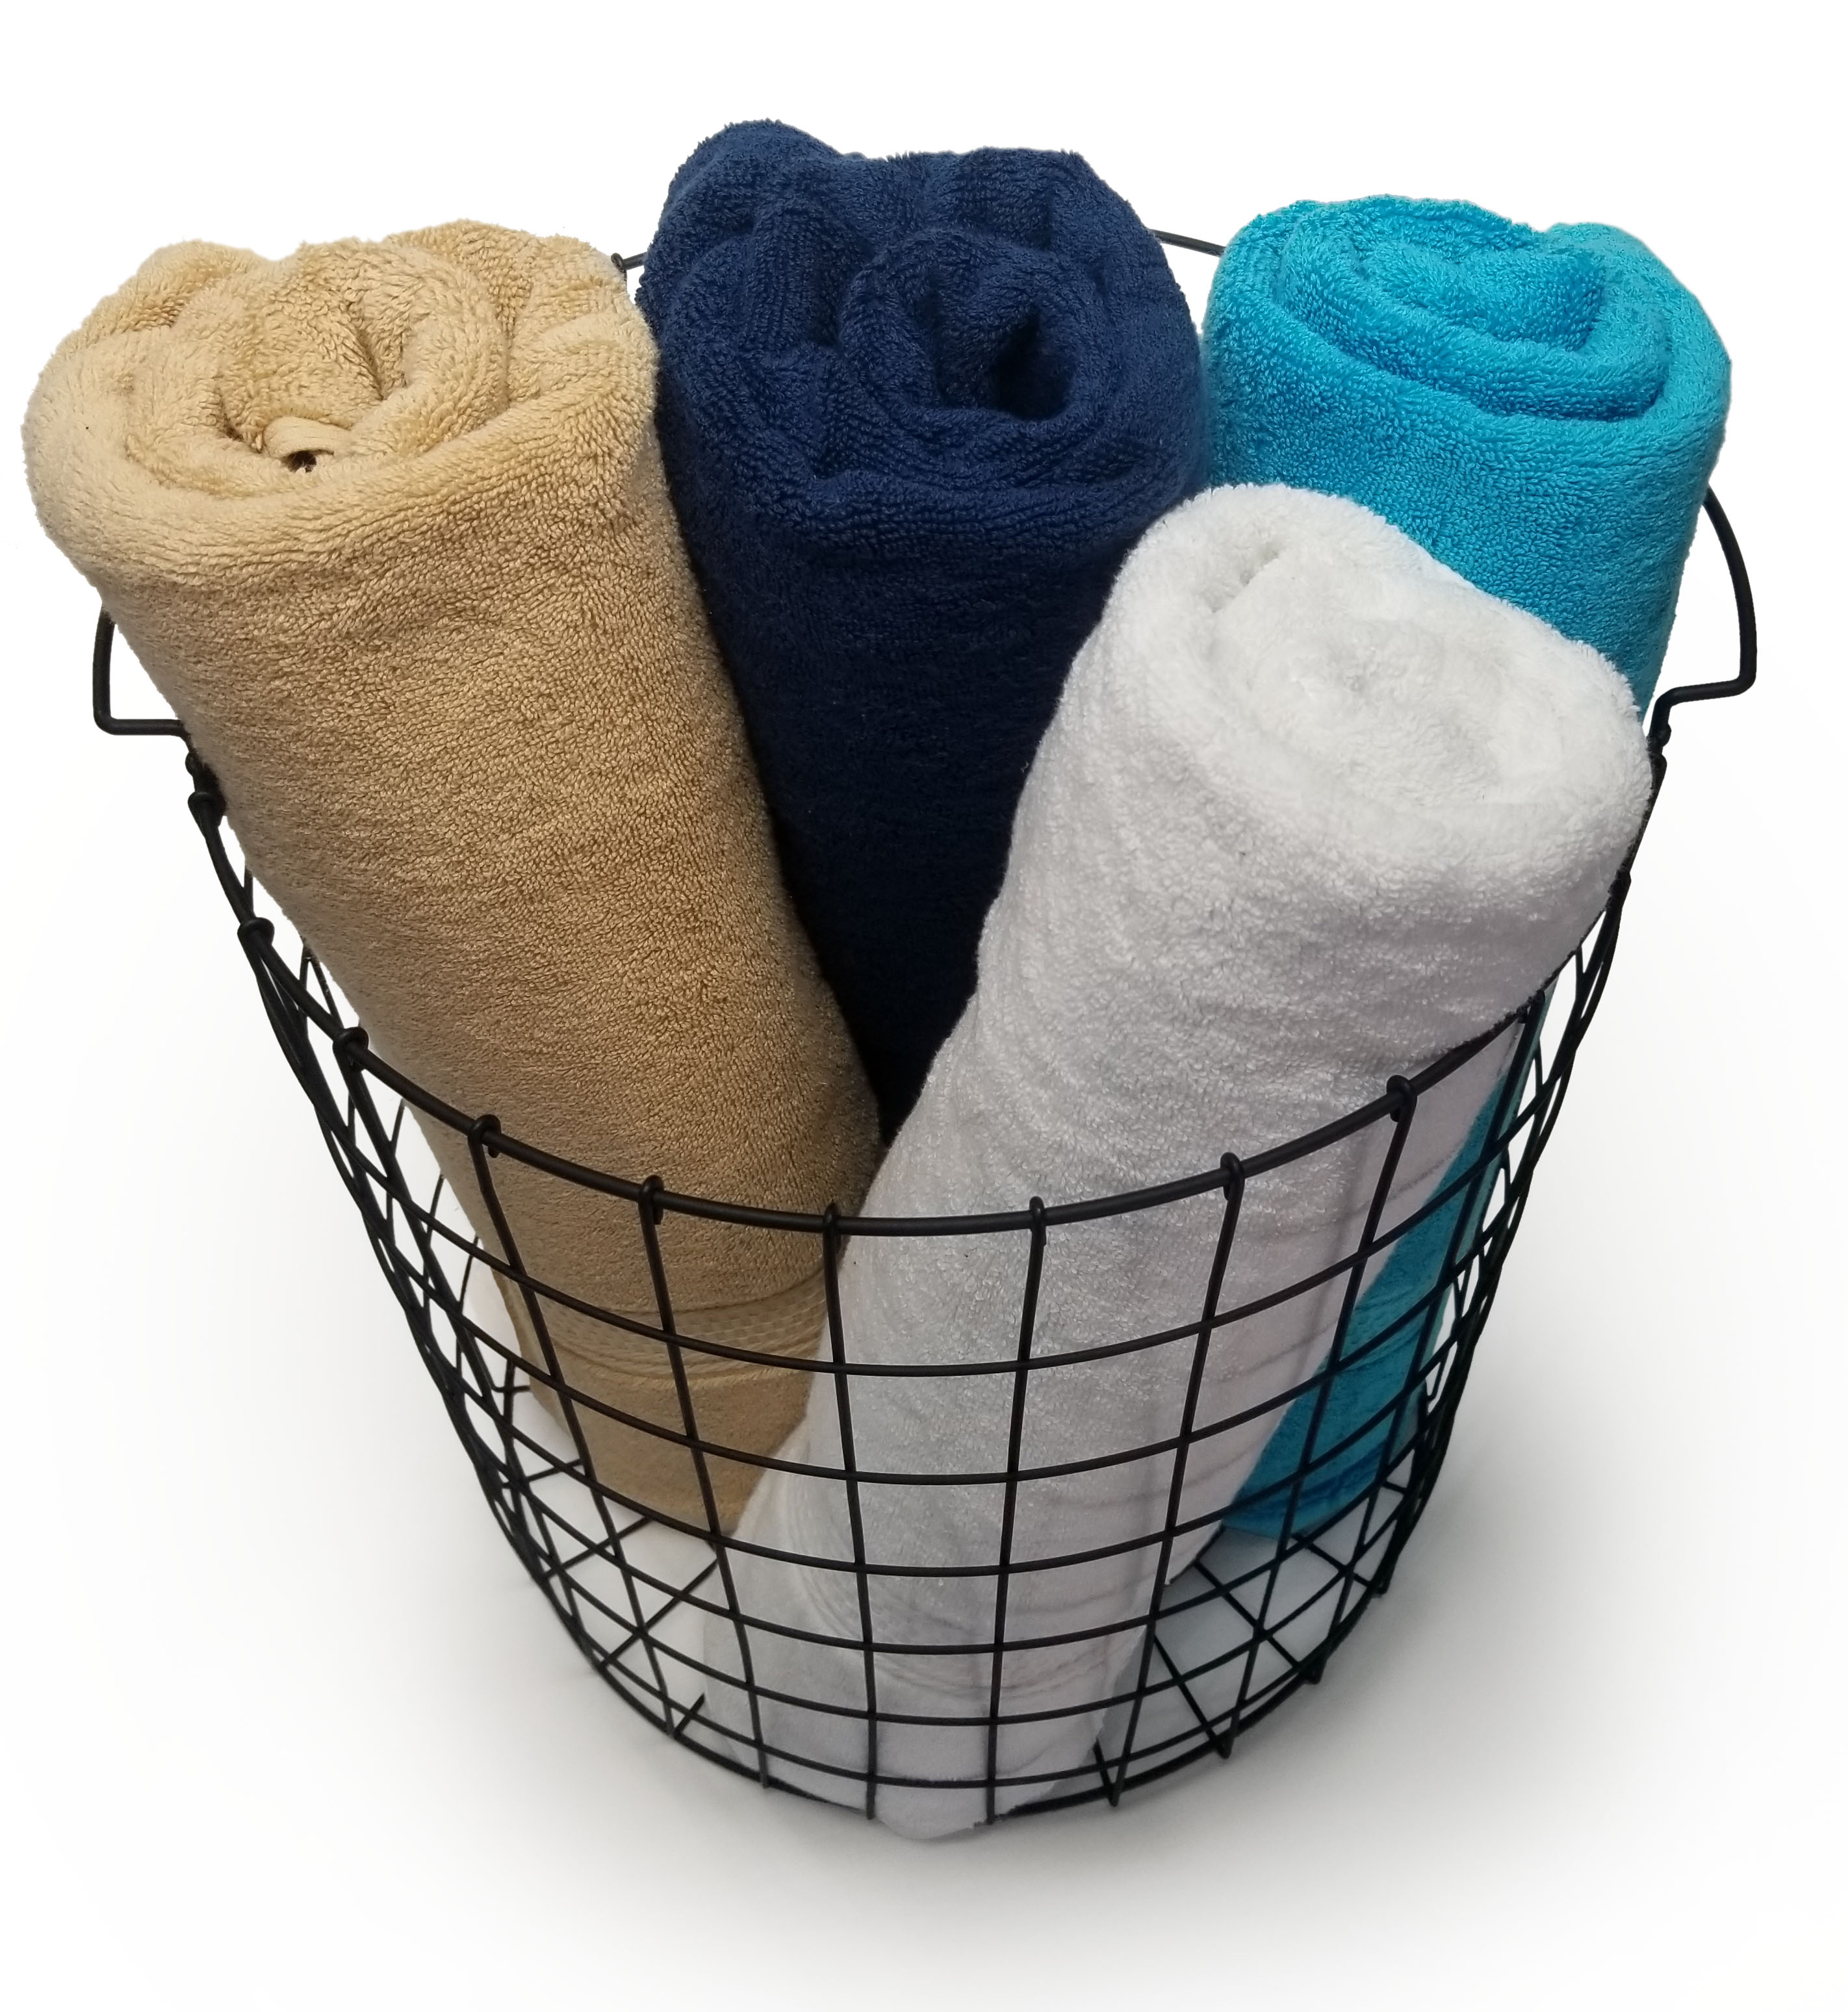 EMBROIDERED  24x48 Bath Towels by Royal Comfort 10.8 Lbs/Dz  Woven   RING SPUN COTTON 